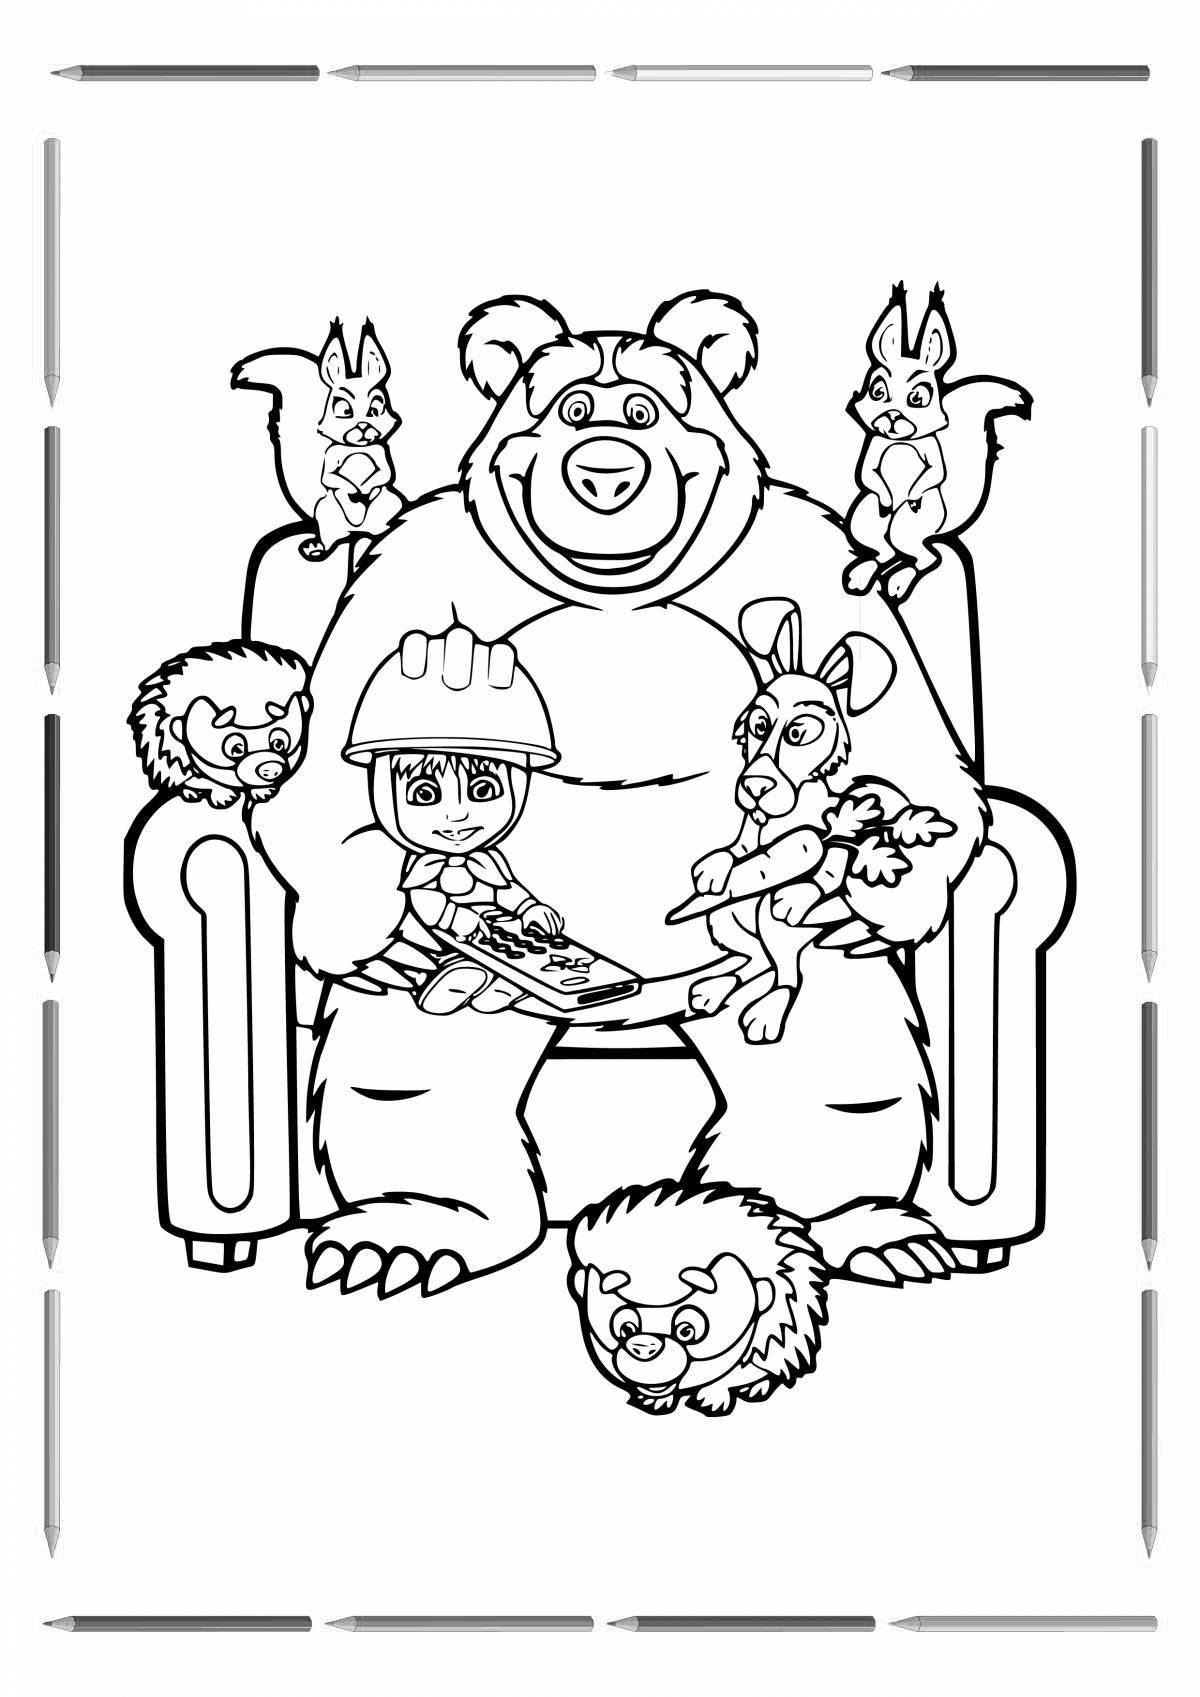 Misha's exciting coloring book